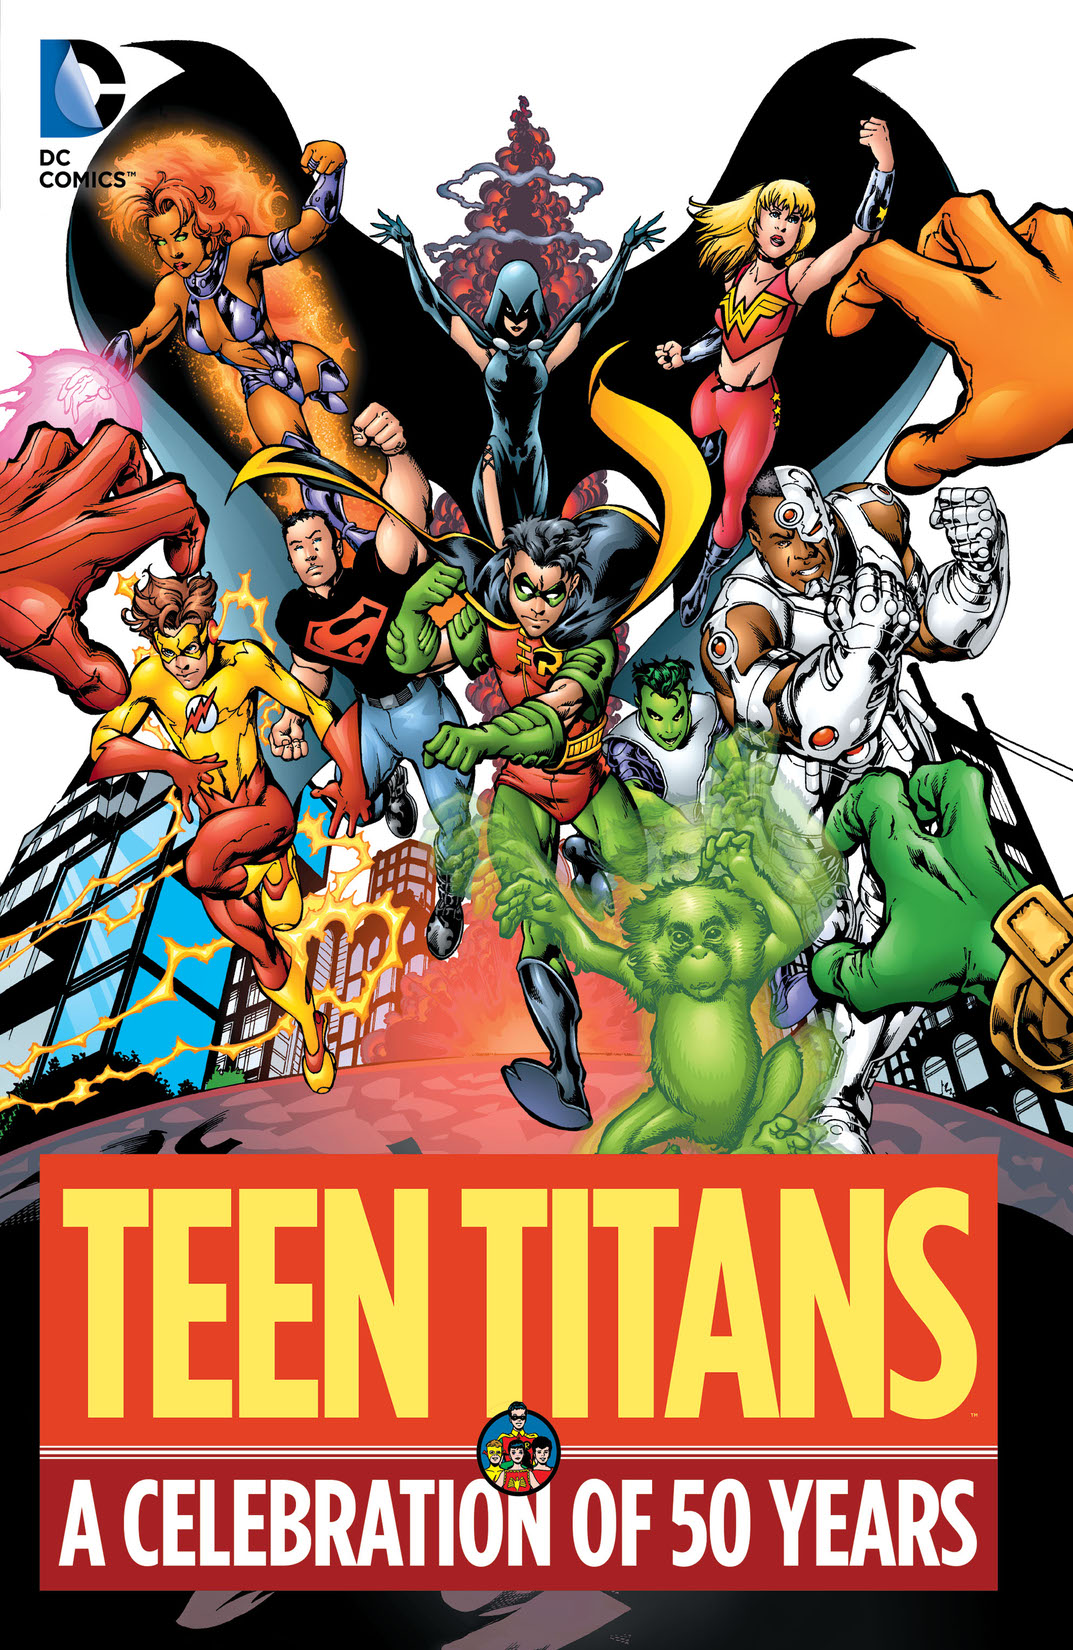 Teen Titans: A Celebration of 50 Years preview images